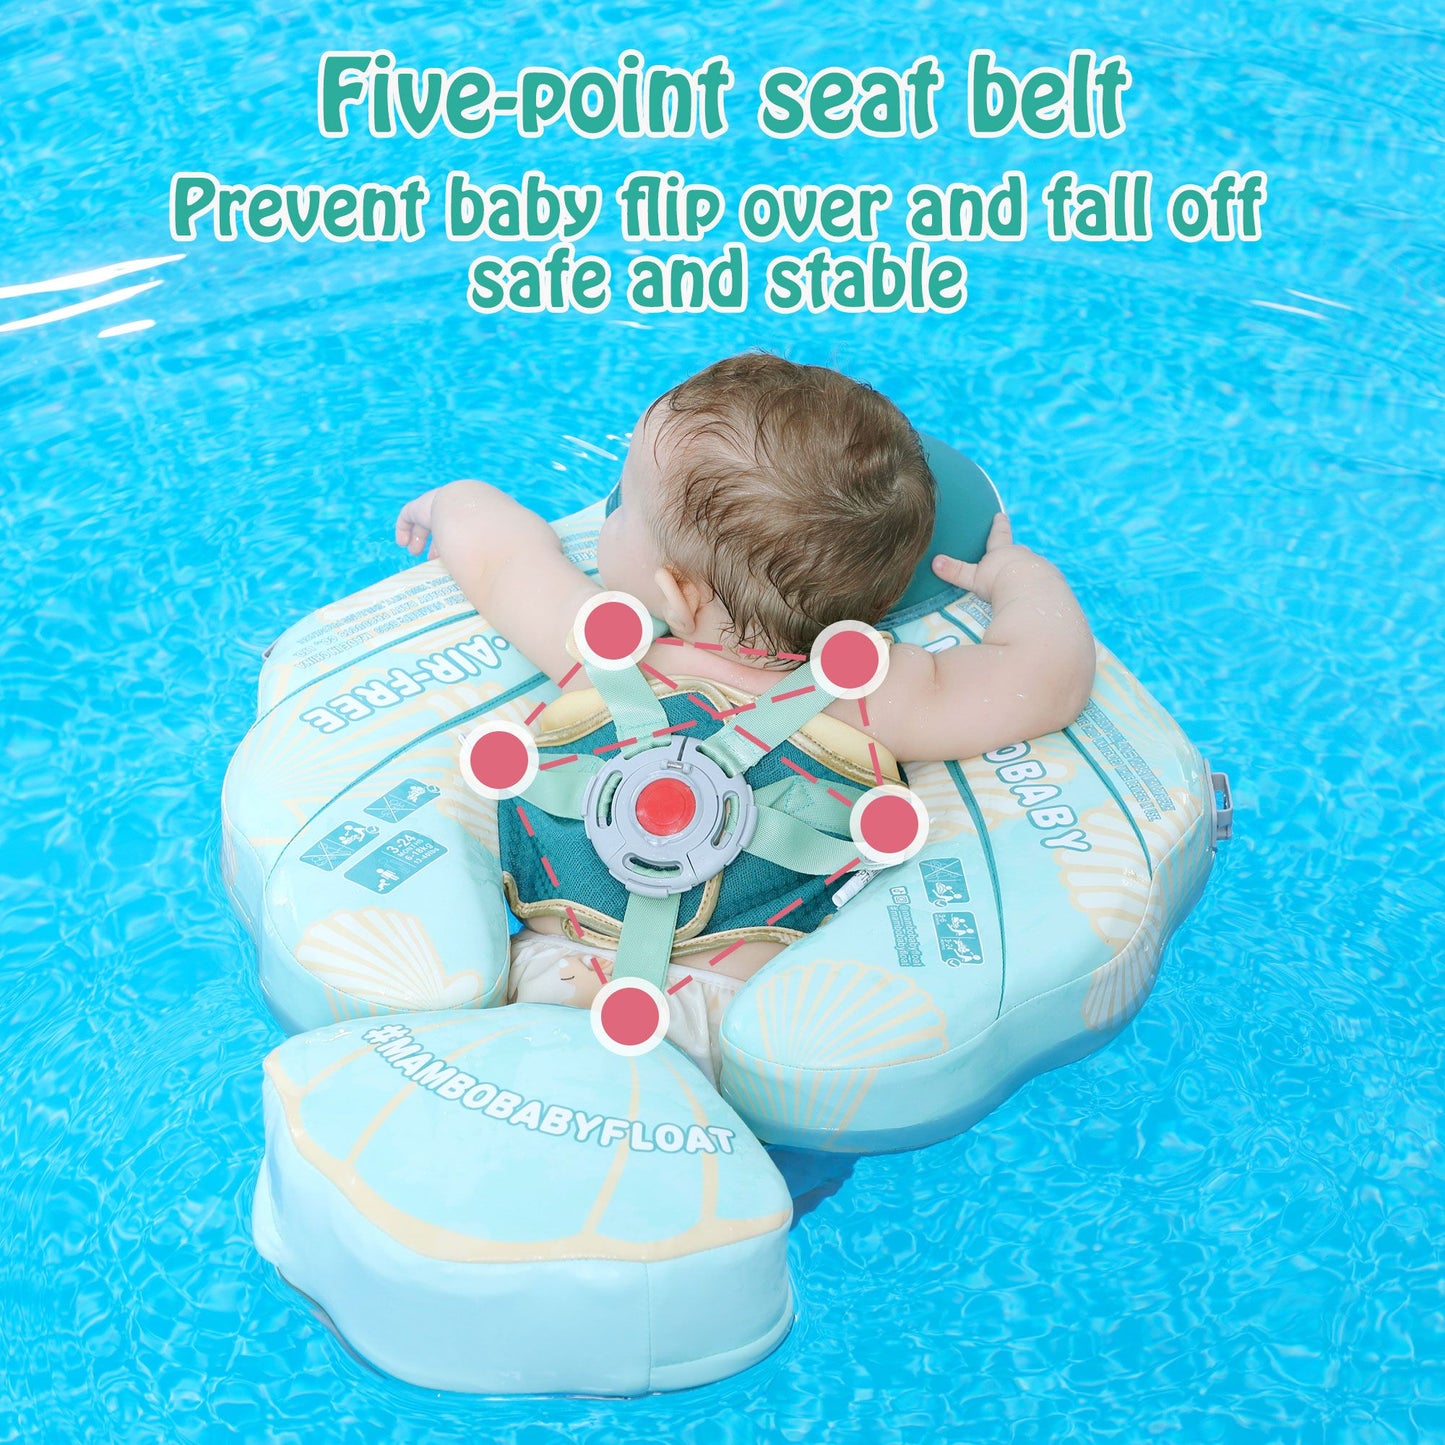 Mambobaby Float Seashell with Canopy